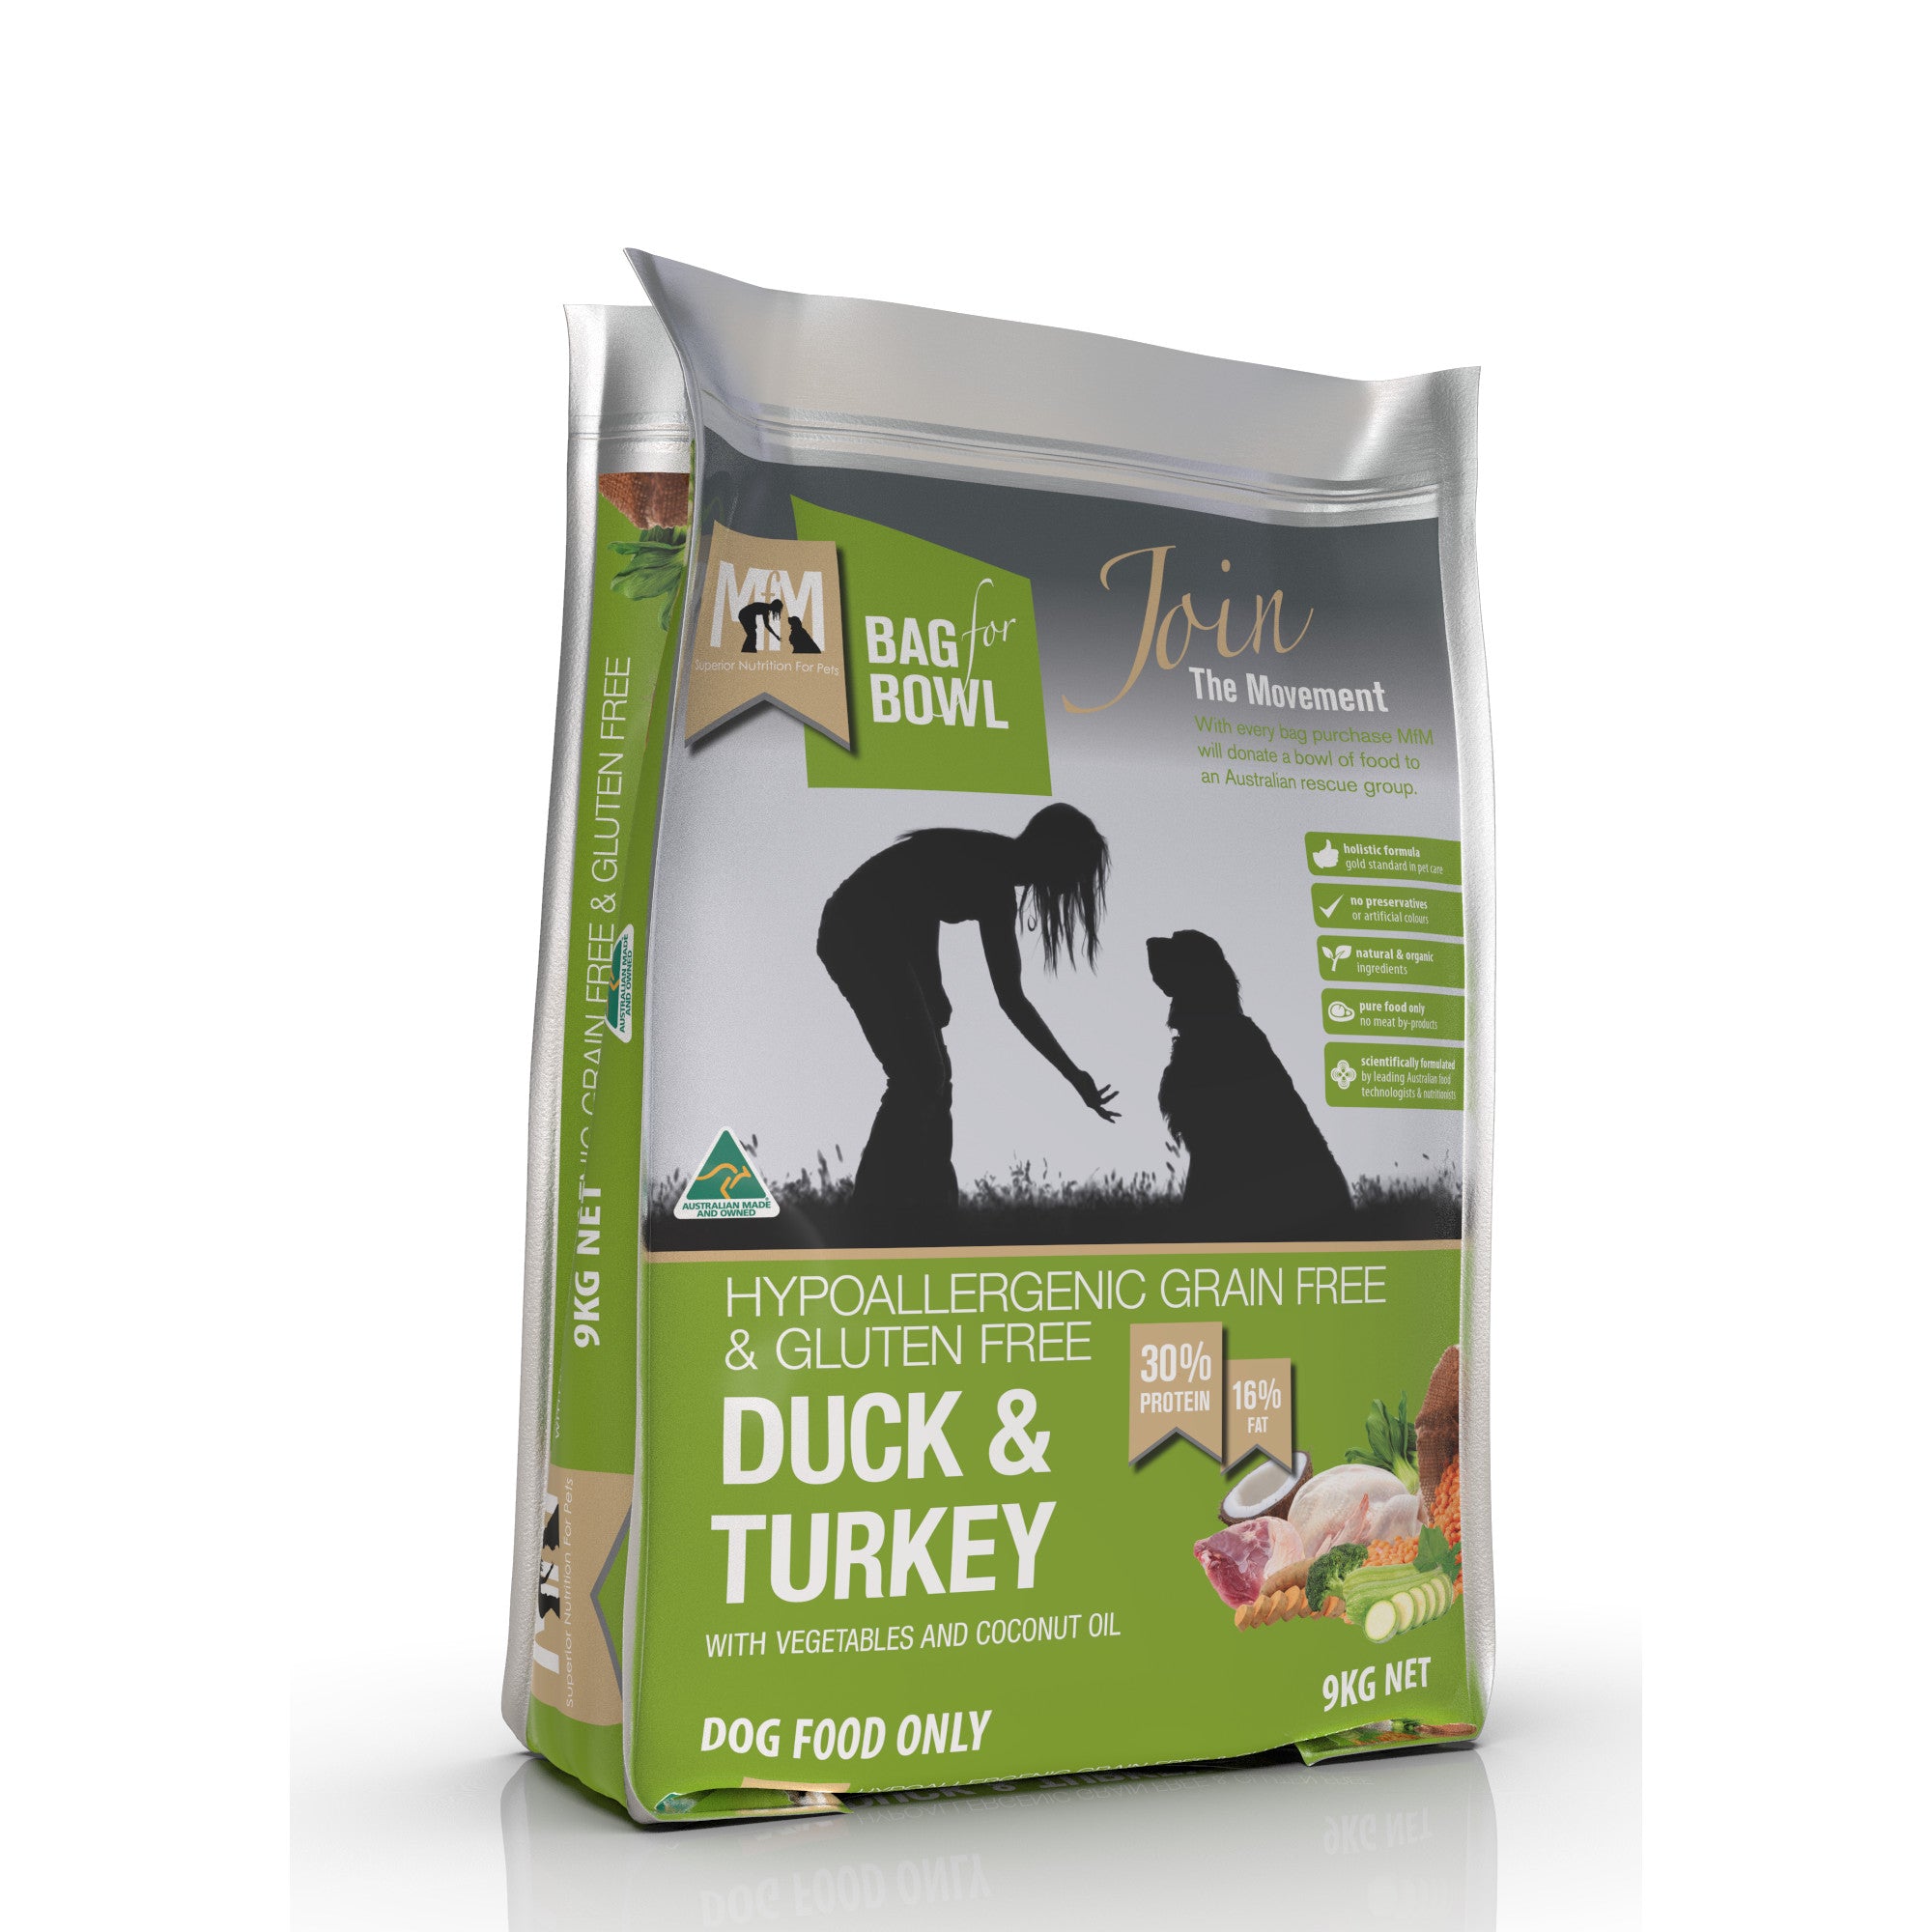 Meals for Mutts Grain Free Duck & Turkey Dog Food 9kg.